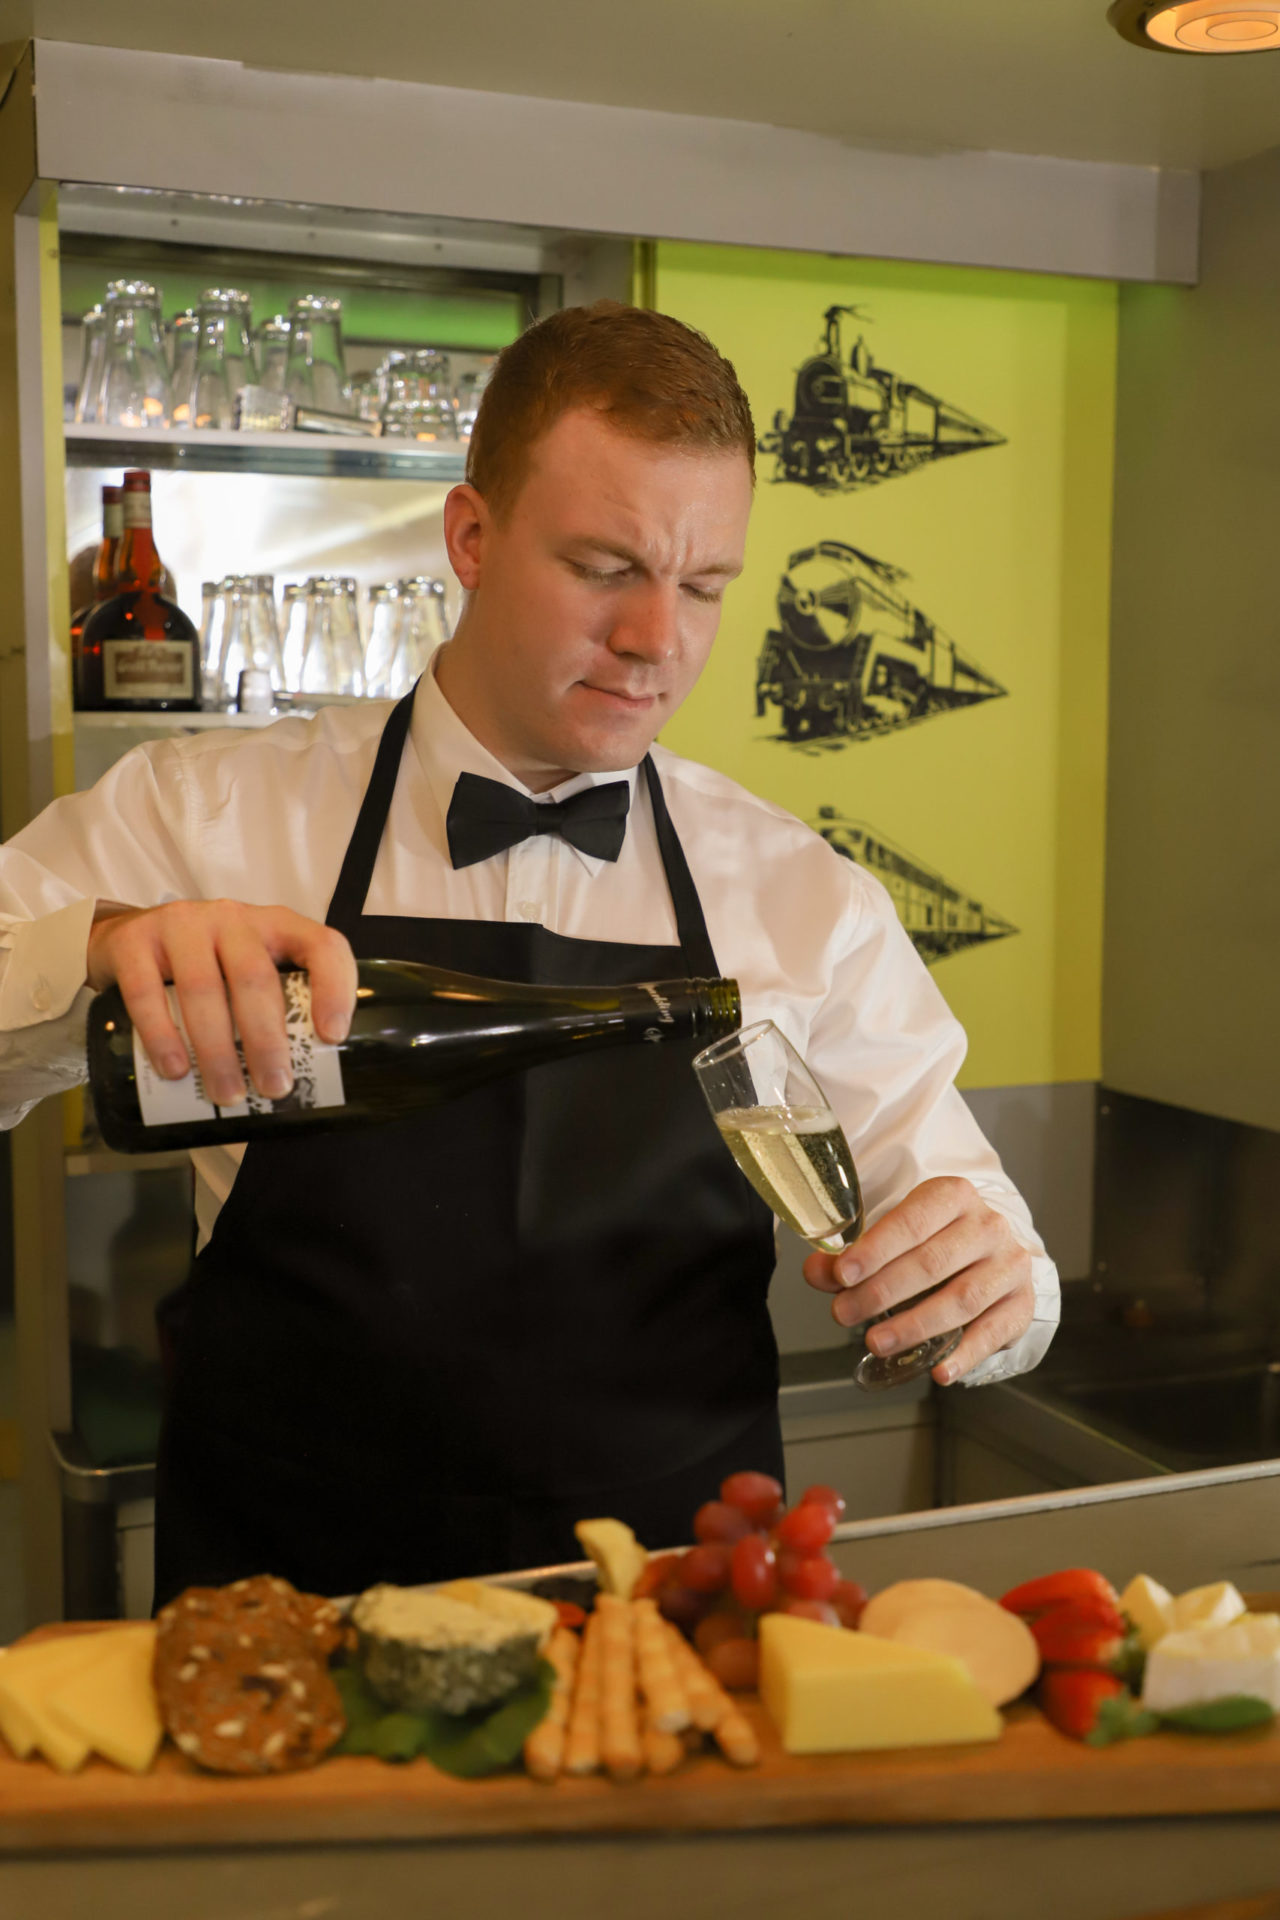 Onboard you'll have a selection of locally sourced wines and fresh regional produce.
